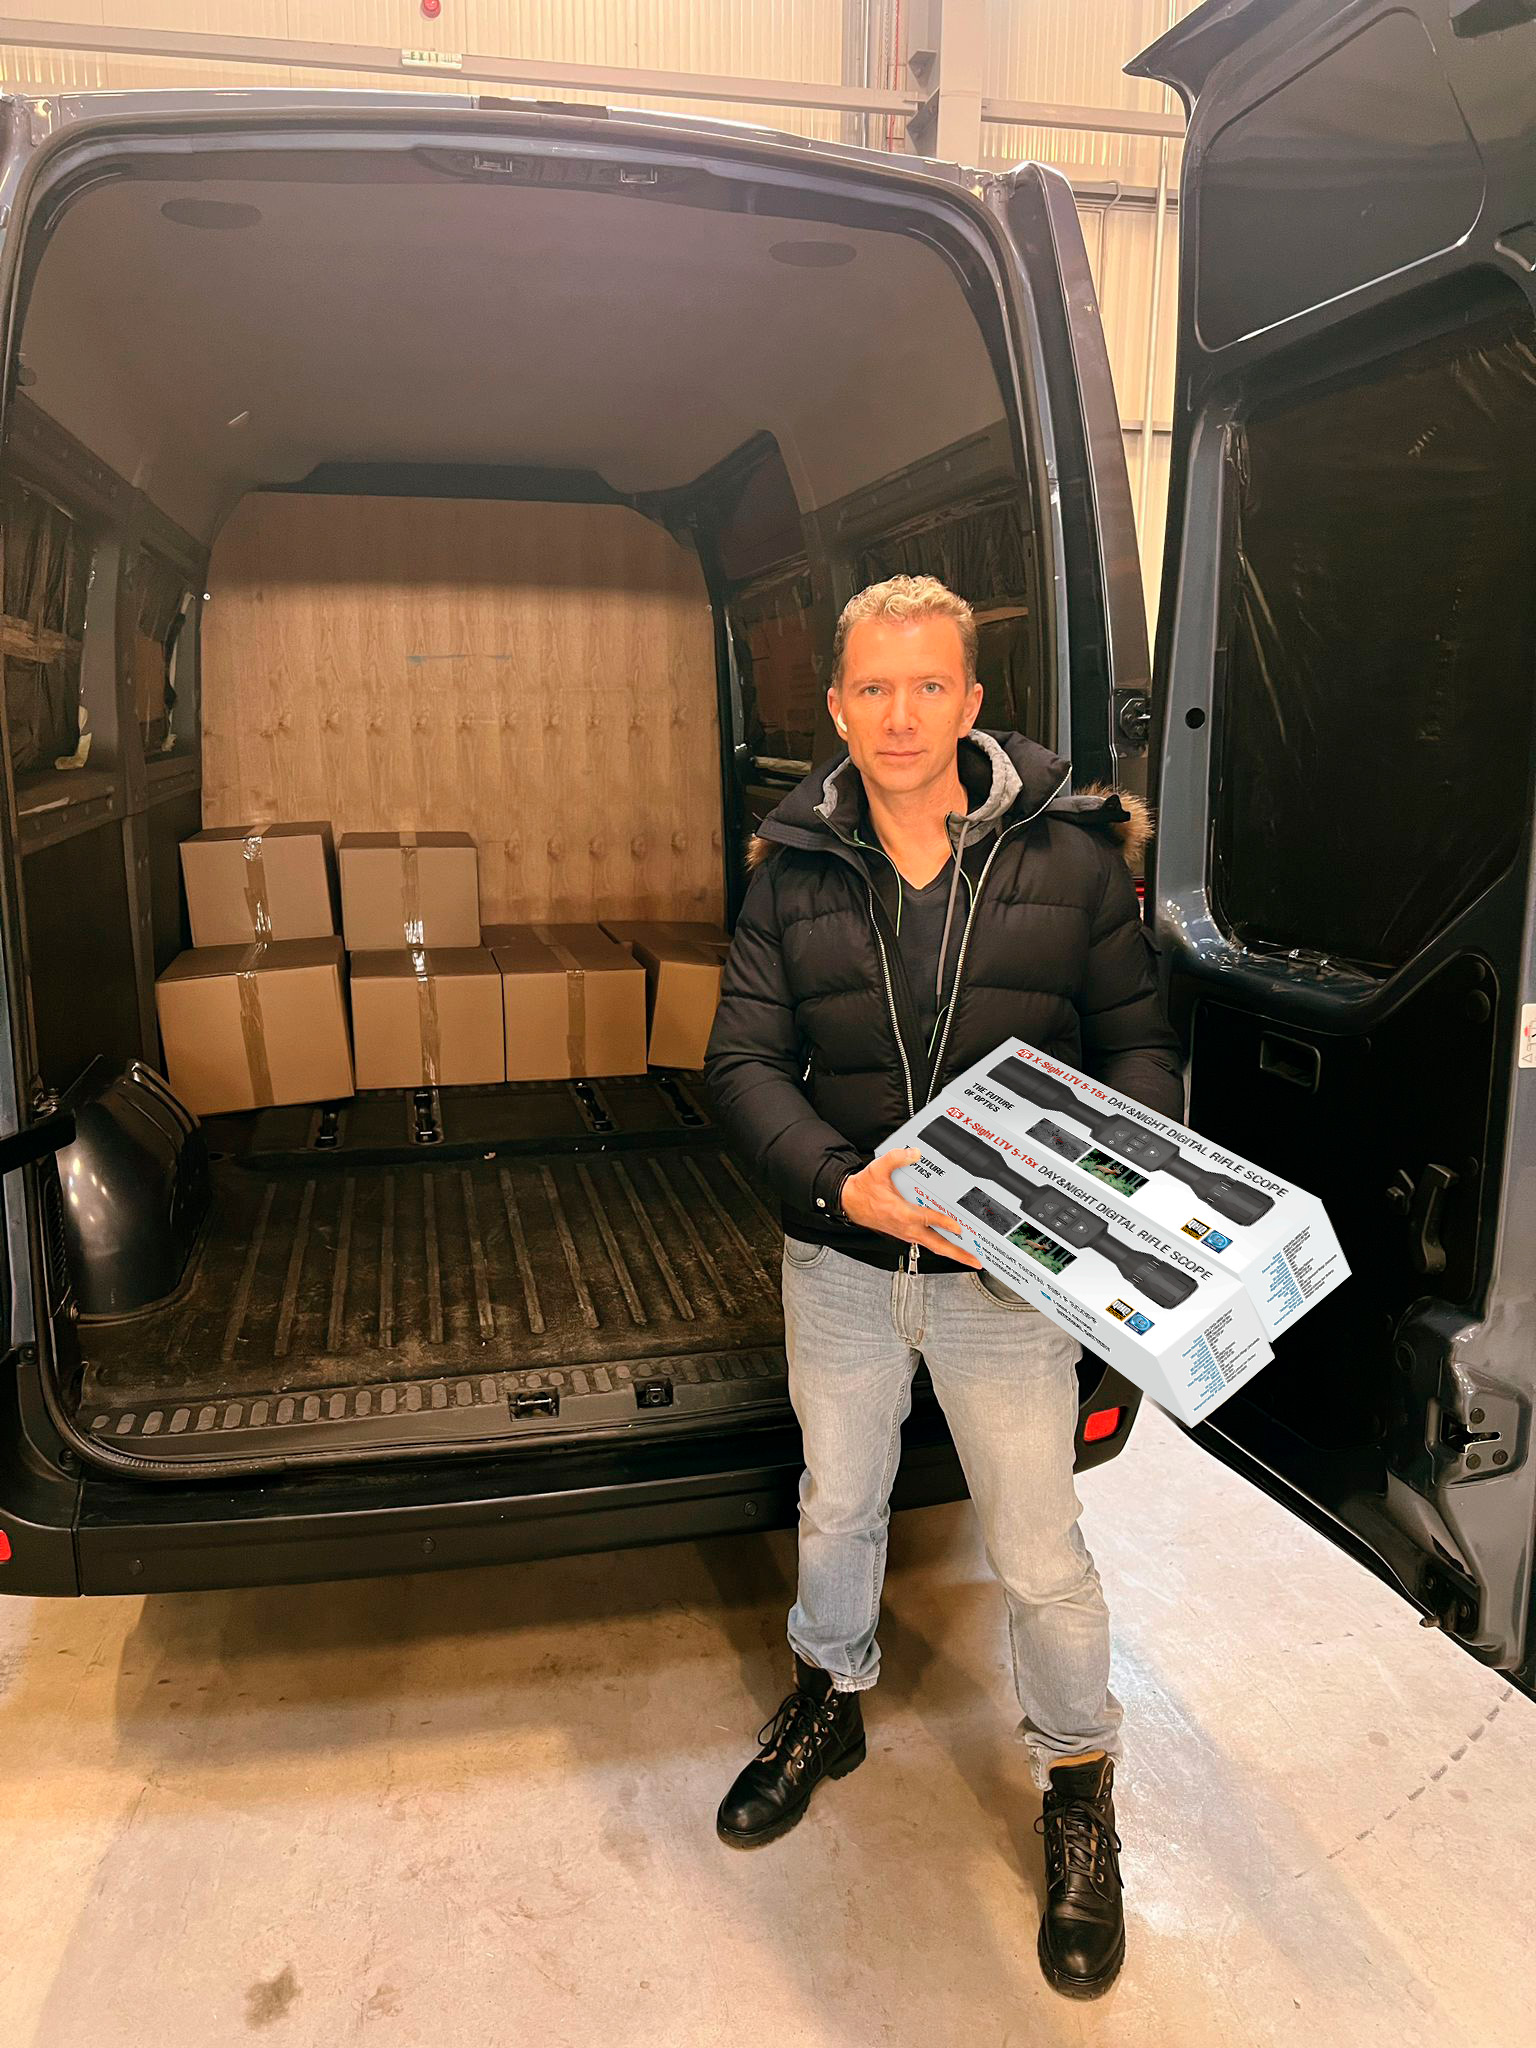 ATN Corp. Founder, Marc Vayn, loading truck with thermal and night vision devices.